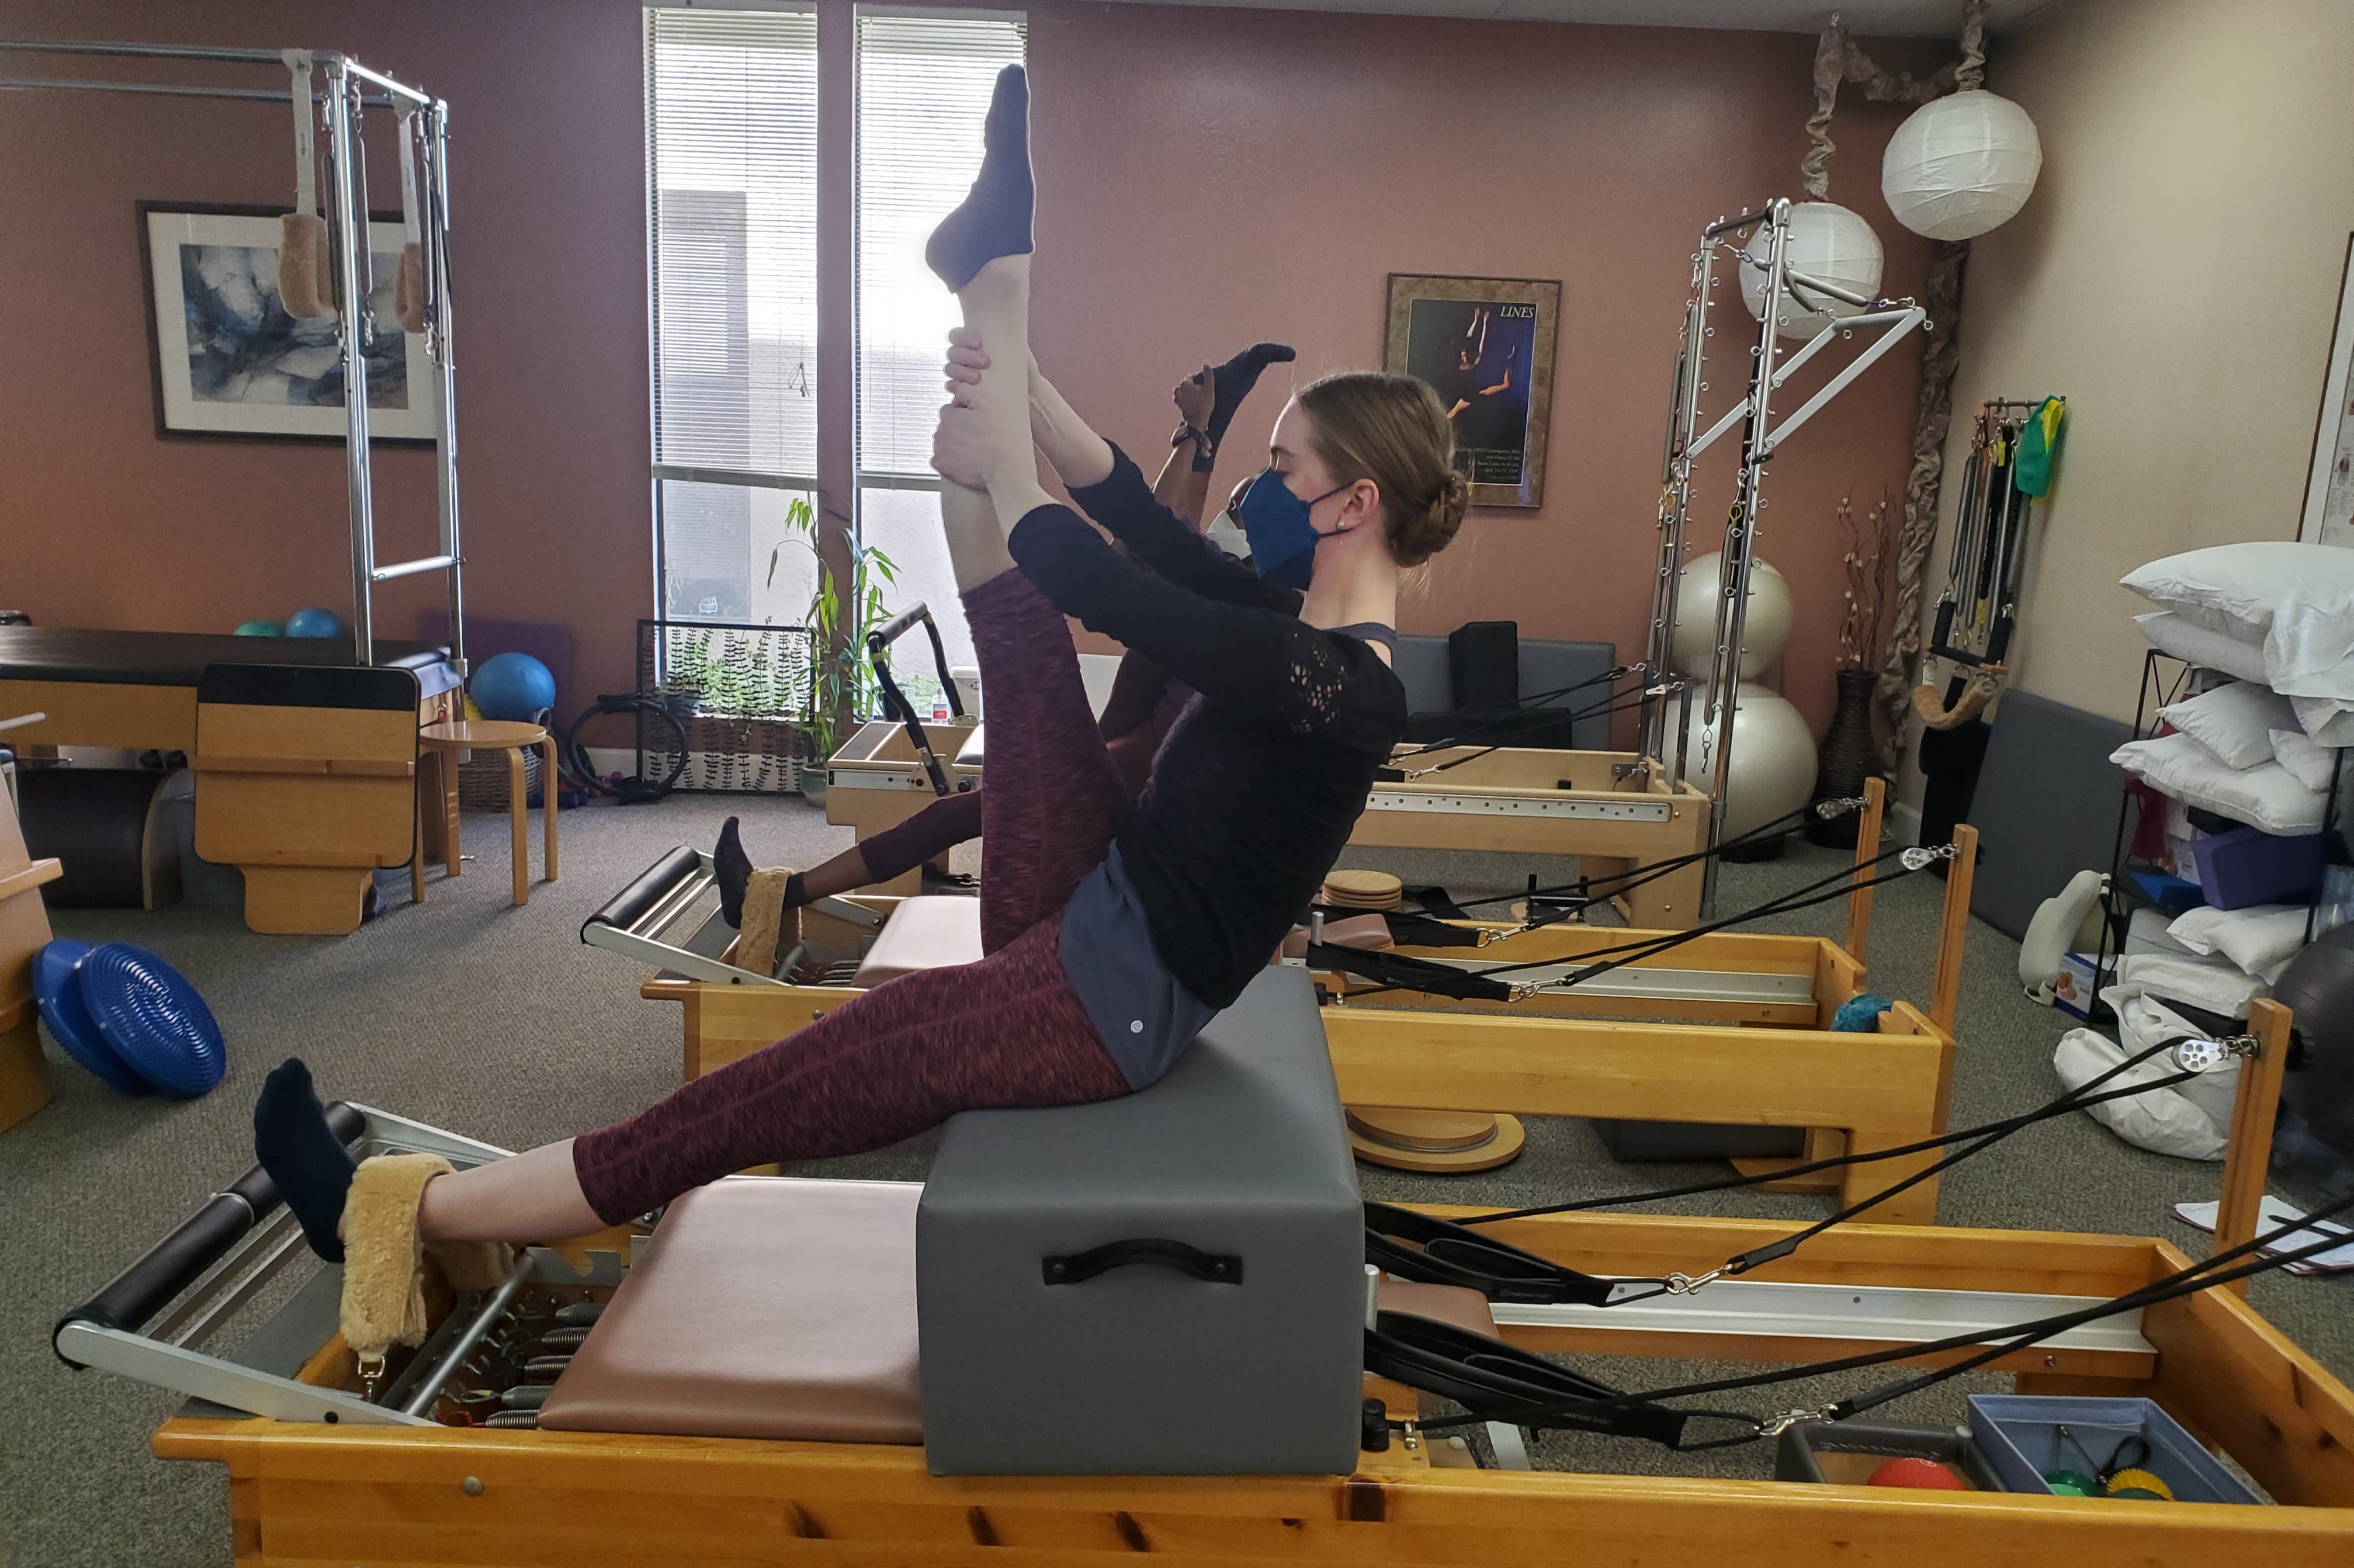 Pilates Social: Read Reviews and Book Classes on ClassPass